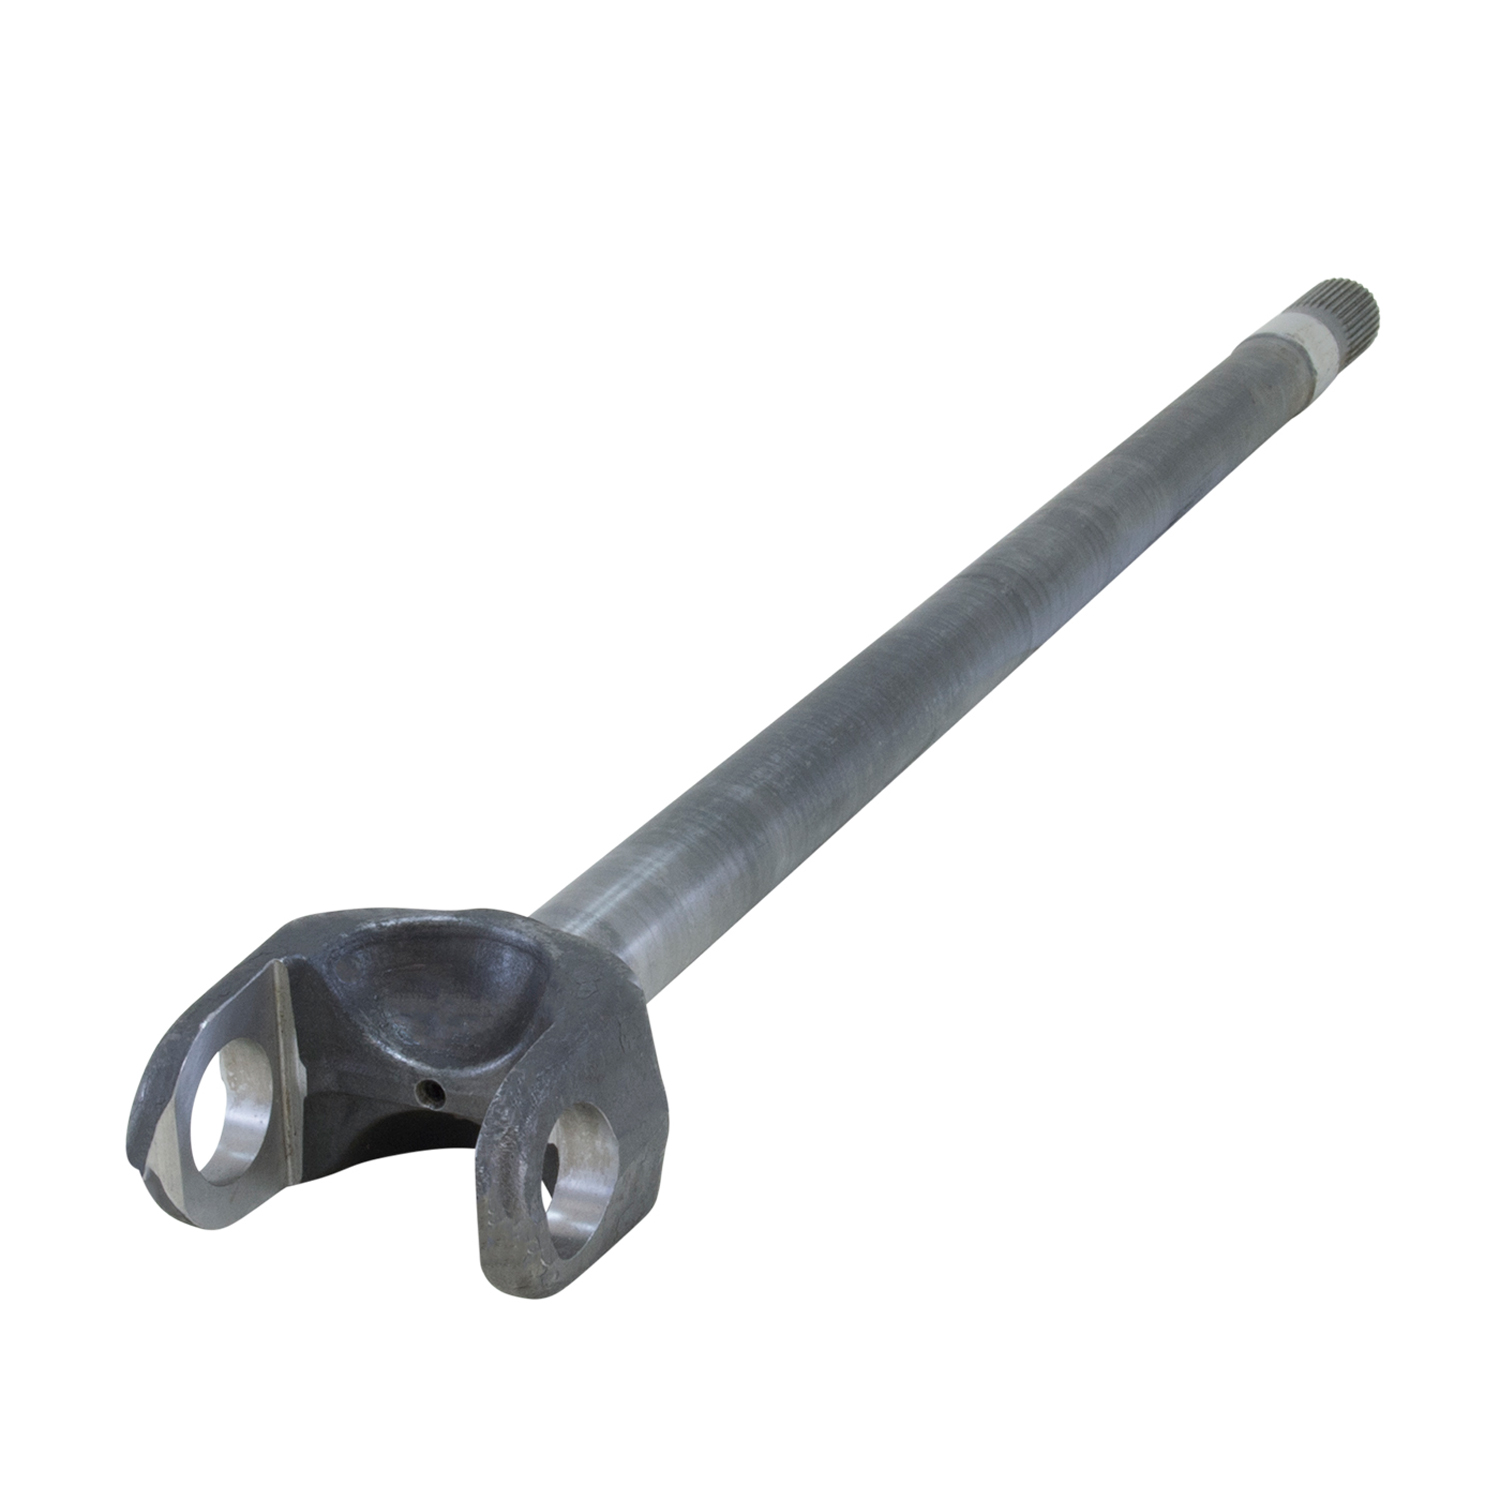 Yukon 1541H replacement inner axle for Dana 44 with a length of 36.13 inches 